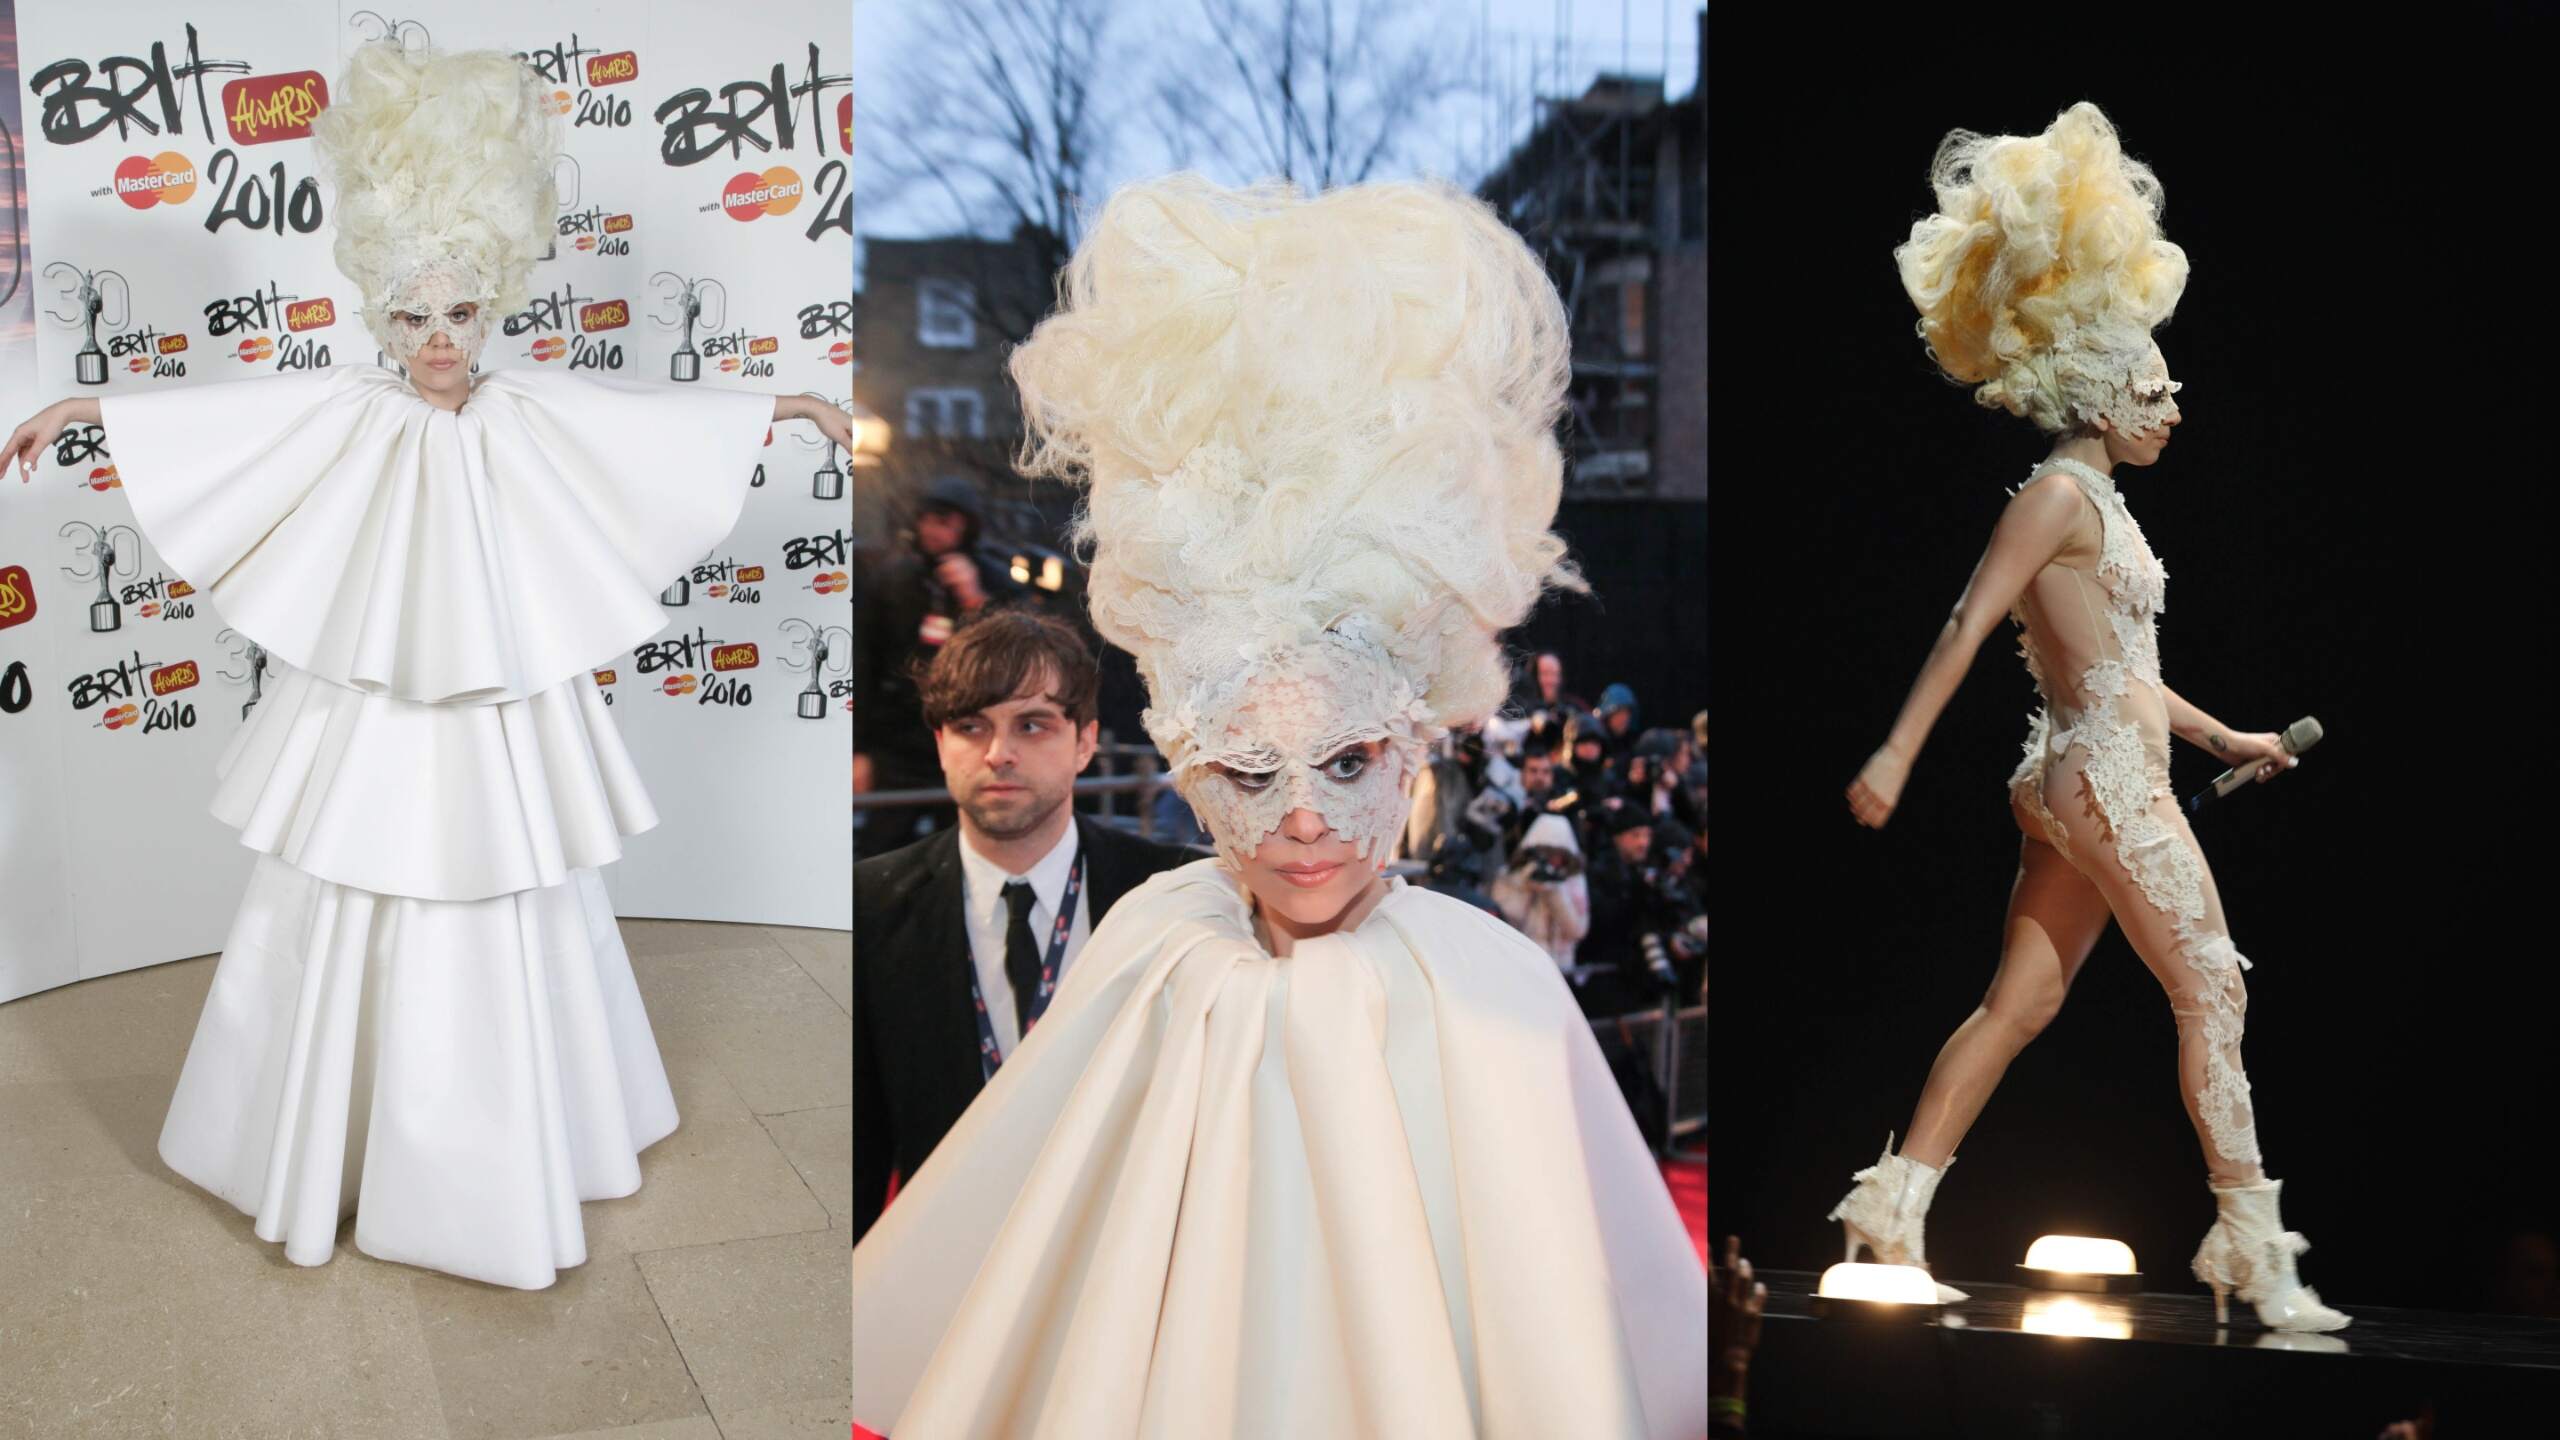 Singer Lady Gaga wears three different white outfits to the 2010 BRIT Awards